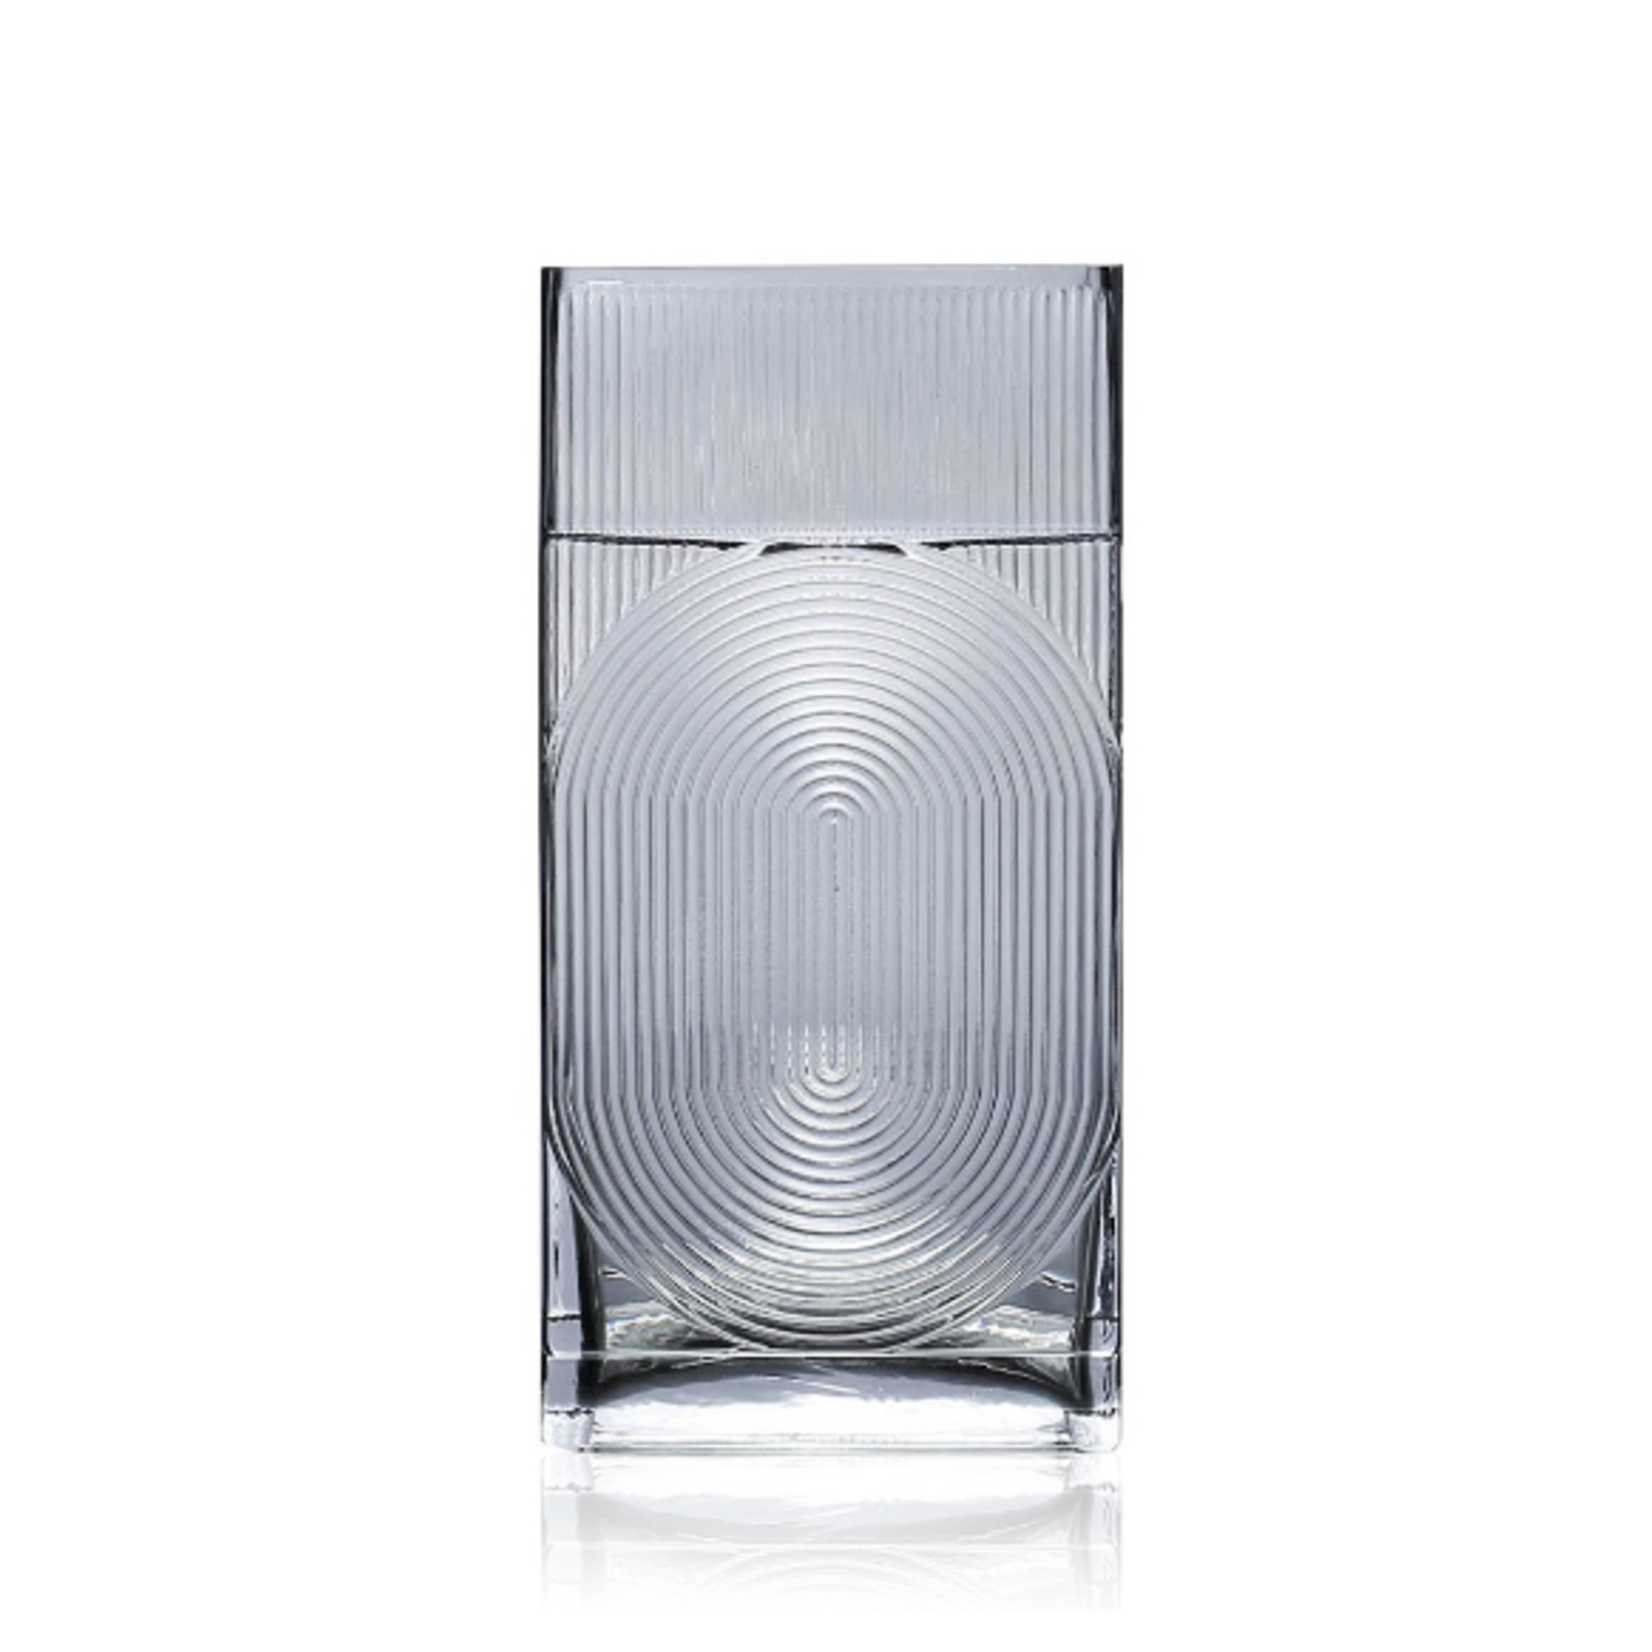 12”H X 6” X 2.75” GREY GLASS RIBBED/FLUTED RECTANGLE